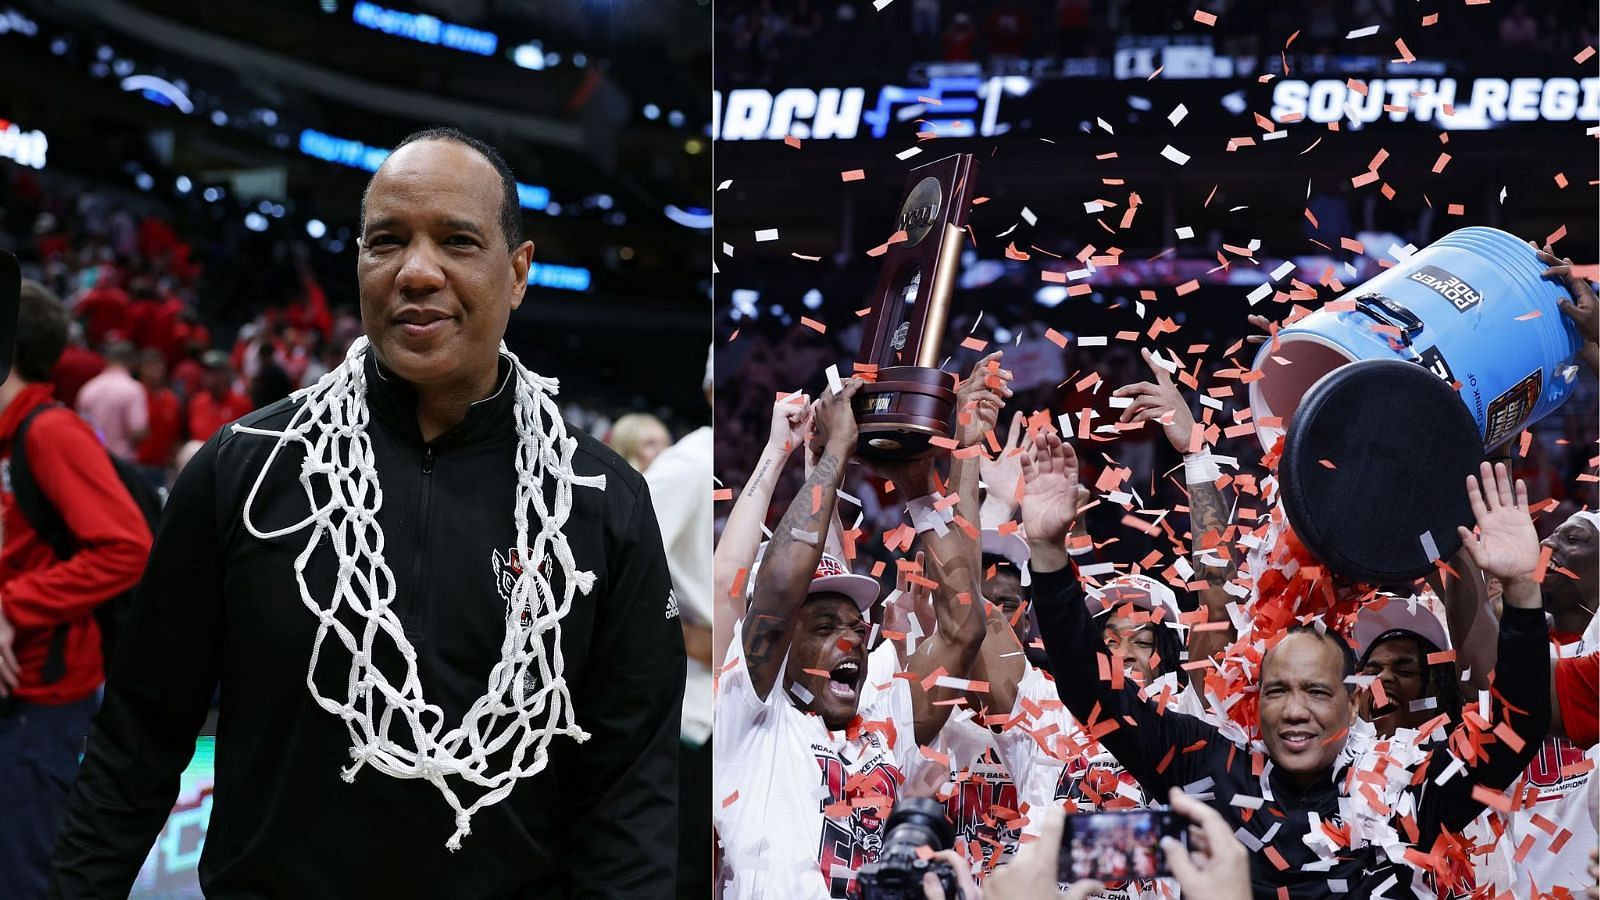 Kevin Keatts and NC State have shocked college basketball. Can they take down Purdue on Saturday?